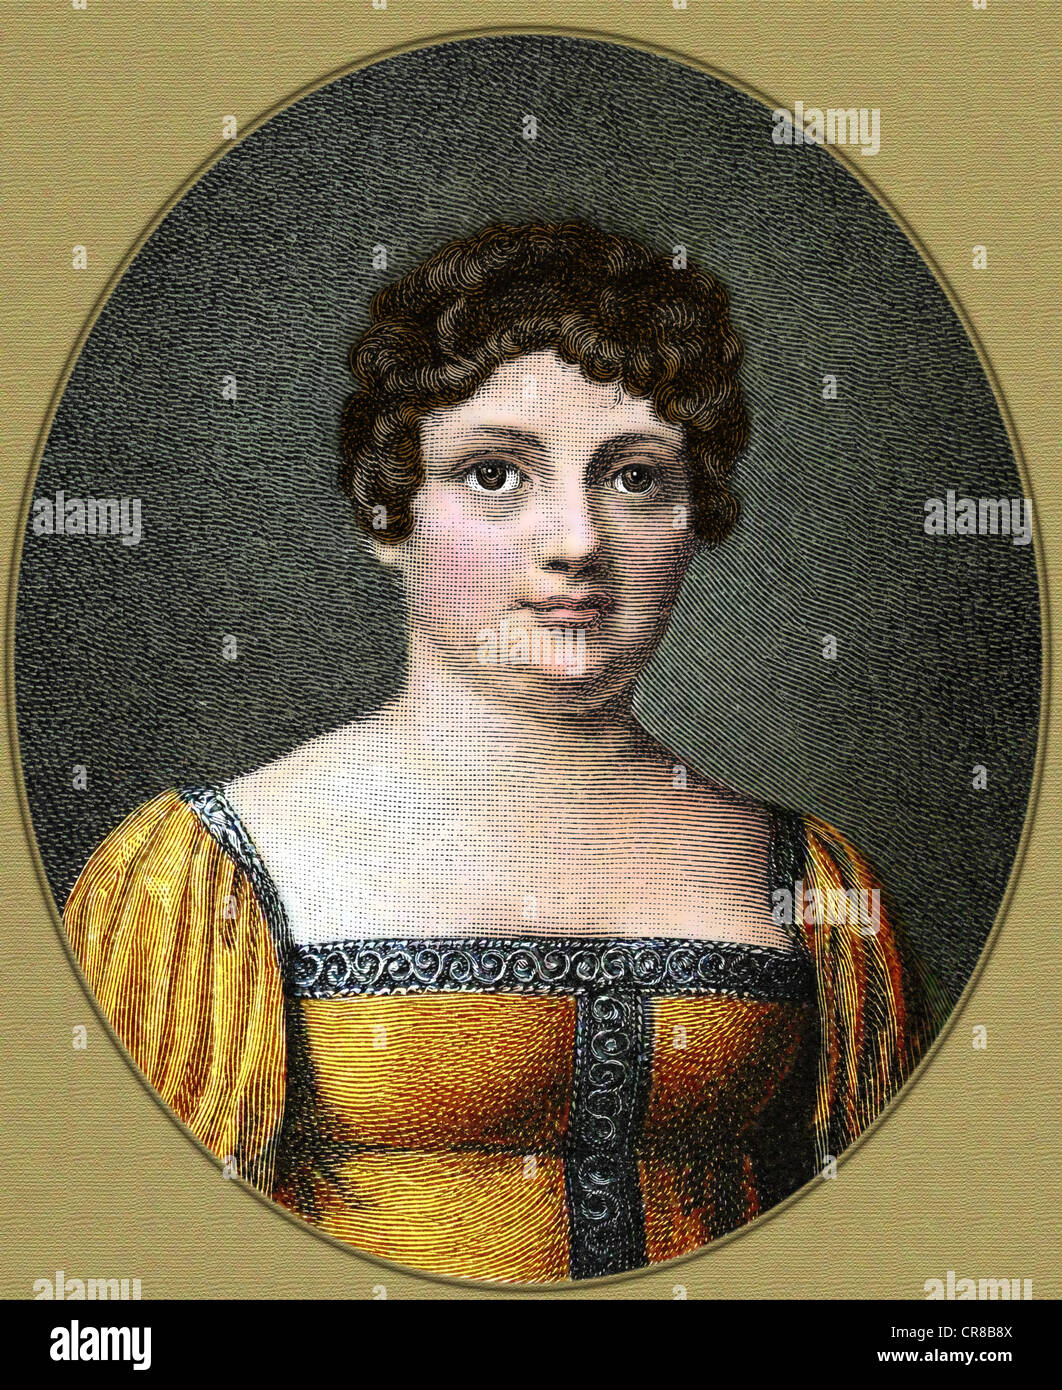 Vulpius, Christiane, 1.6.1765 - 6.6.1816, wife of Johann Wolfgang von Goethe, portrait, later coloured wood engraving after painting by Raabe from 1810, Artist's Copyright has not to be cleared Stock Photo